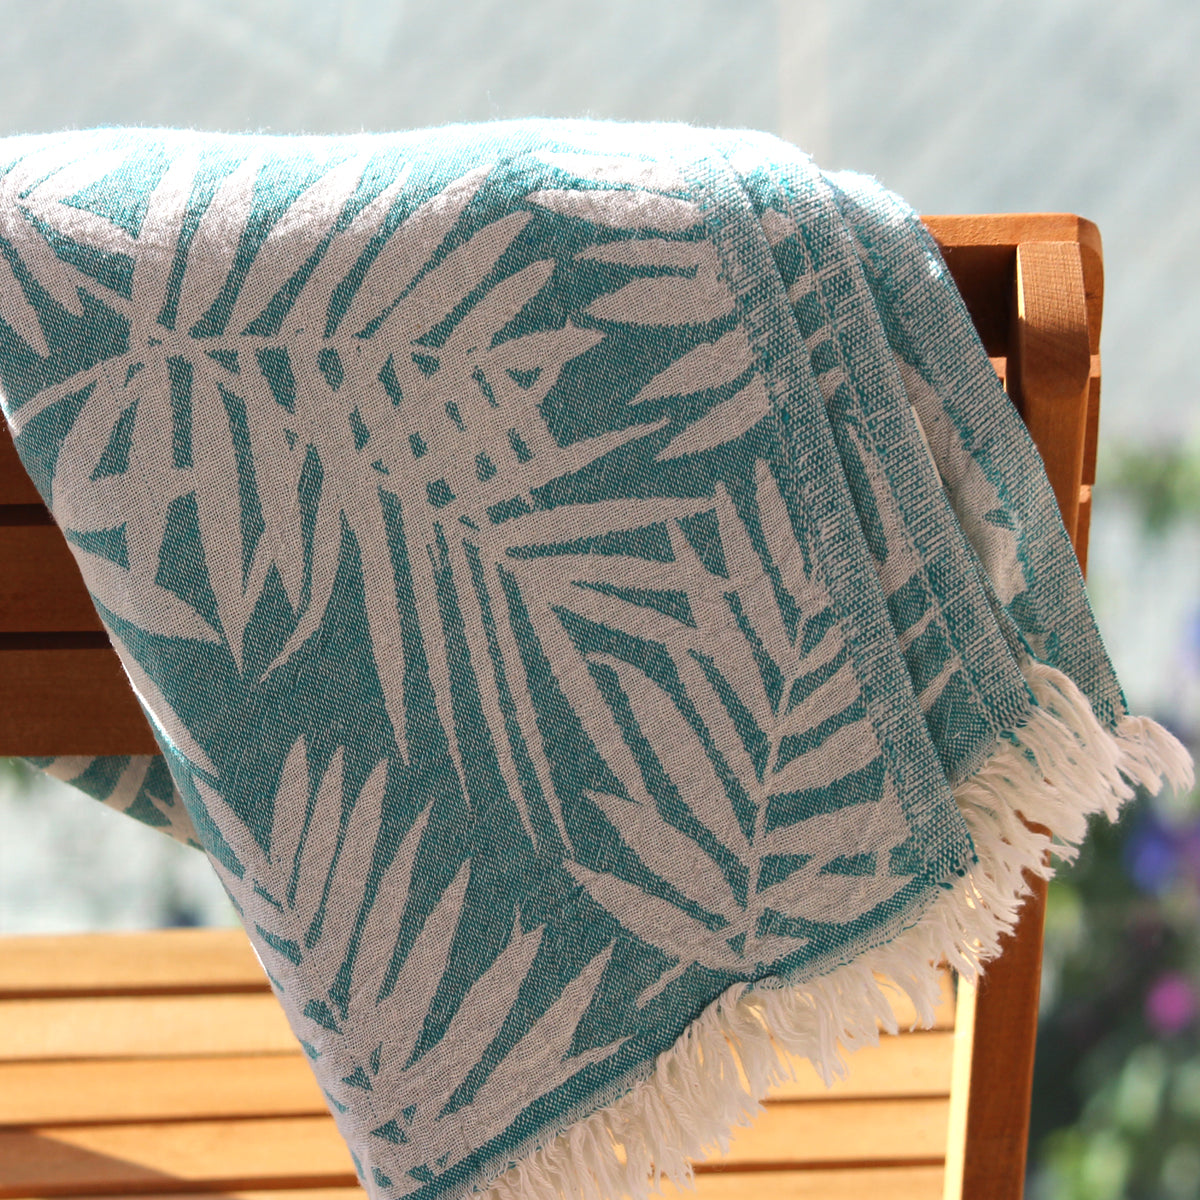 for Turkish QuiQuattro beach, from – more Quiquattro bath Authentic Towels and